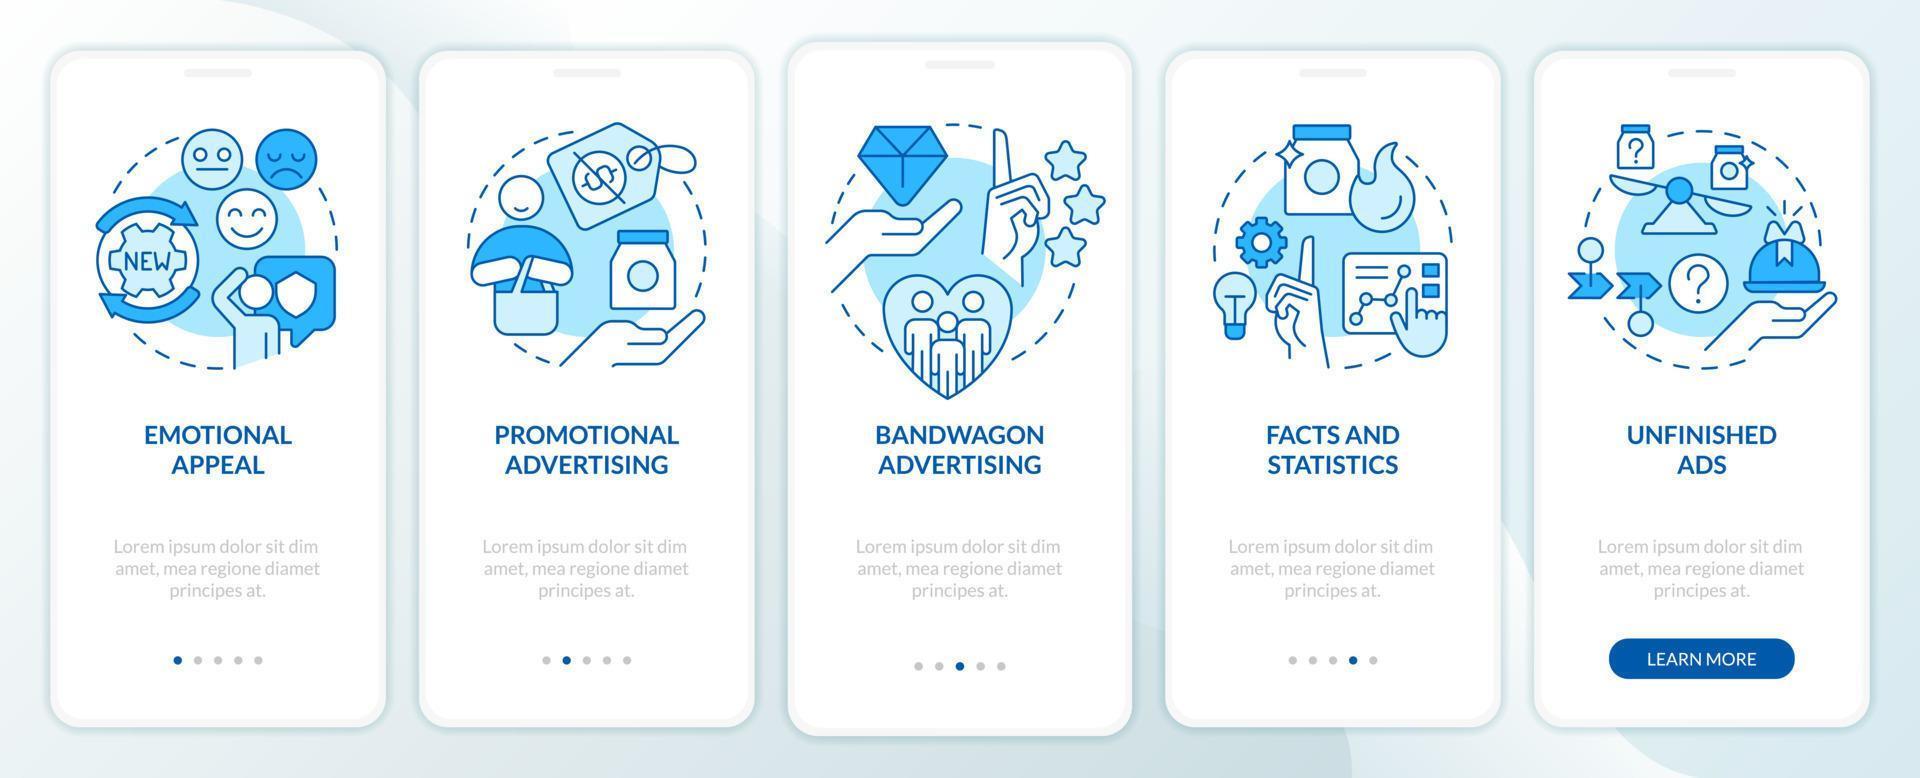 Advertising strategies in marketing blue onboarding mobile app screen. Walkthrough 5 steps editable graphic instructions with linear concepts. UI, UX, GUI template vector